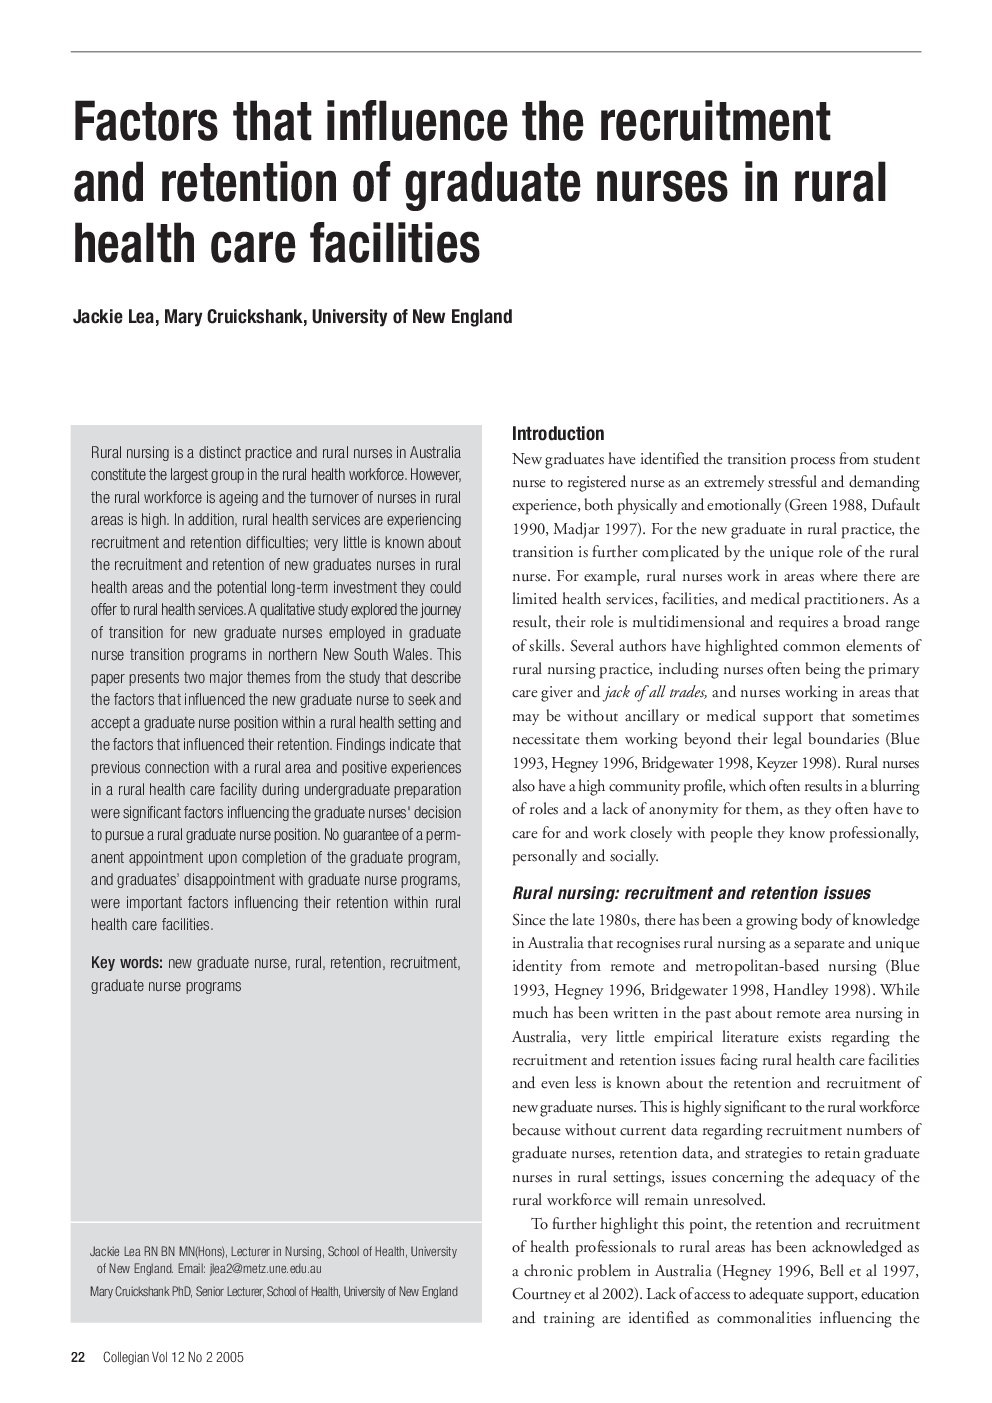 Factors that influence the recruitment and retention of graduate nurses in rural health care facilities